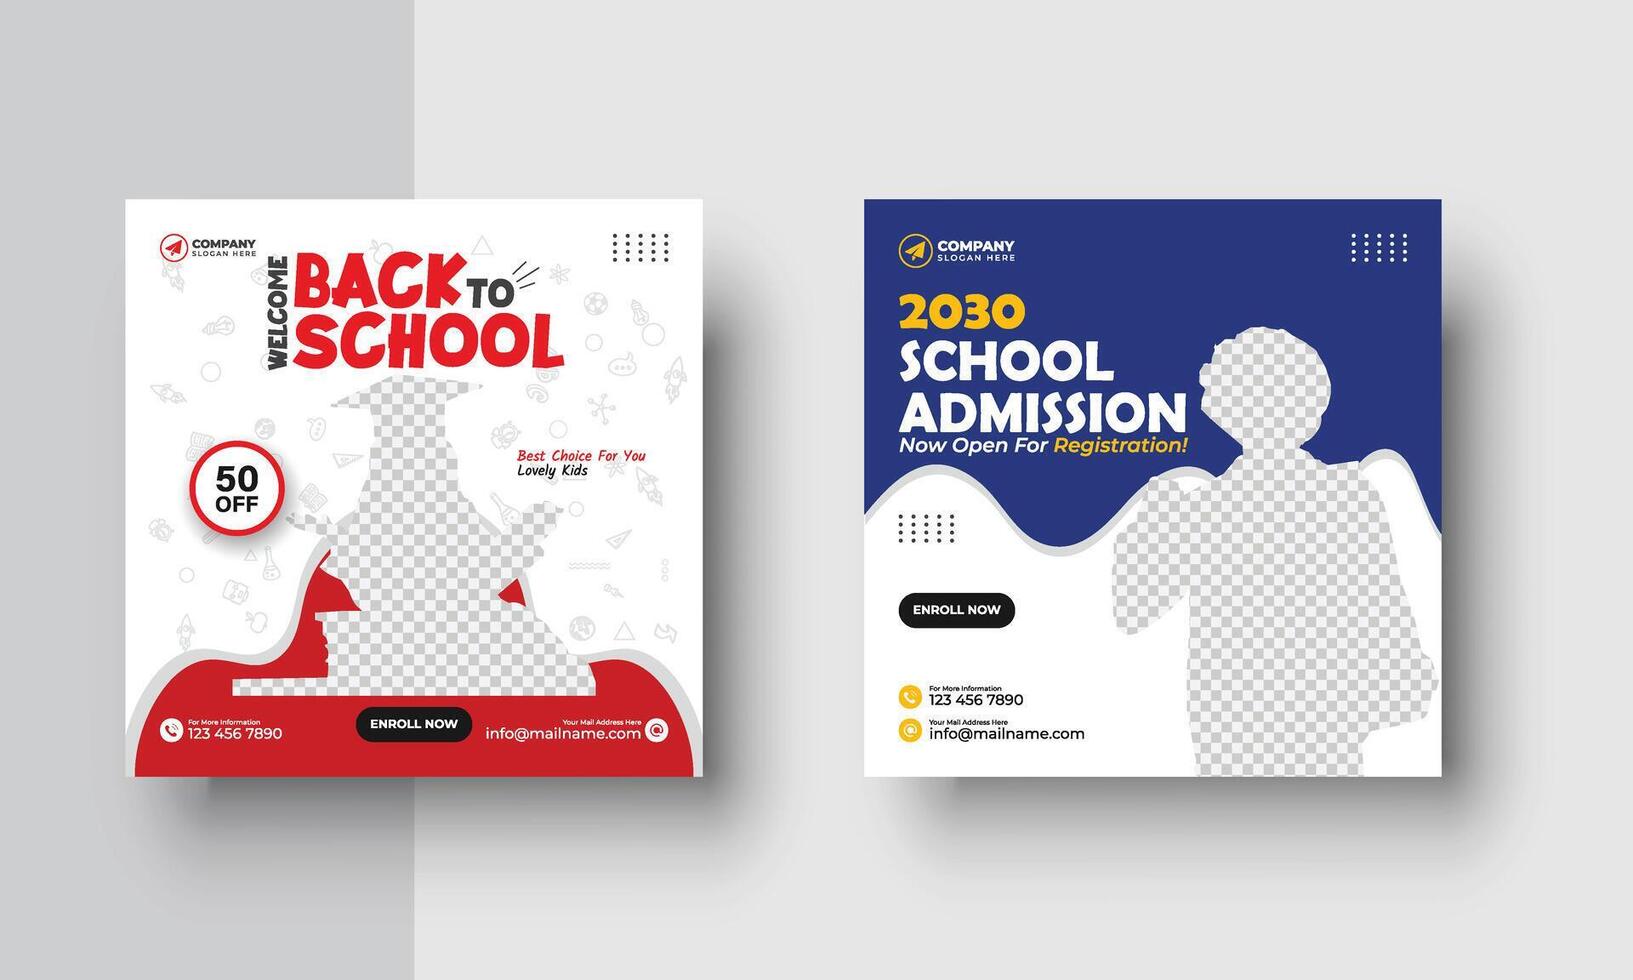 School education admission creative web banner and square social media post template vector